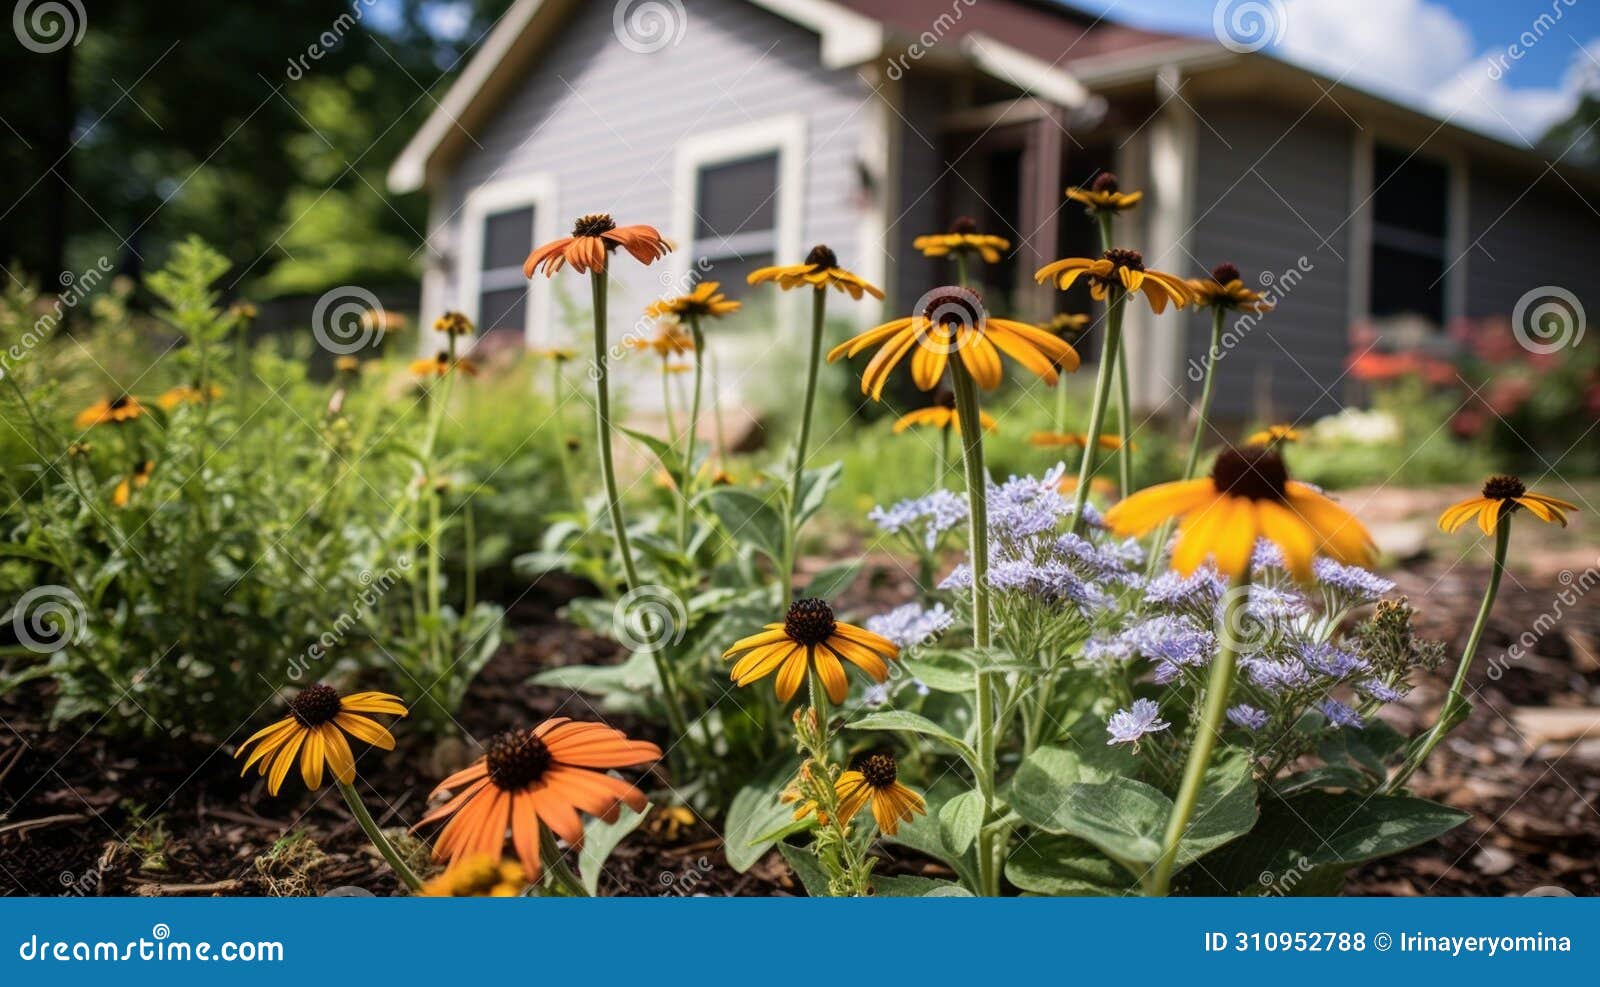 backyard garden with pollinator-friendly plantings. a residential backyard garden blooms with pollinator-friendly plants